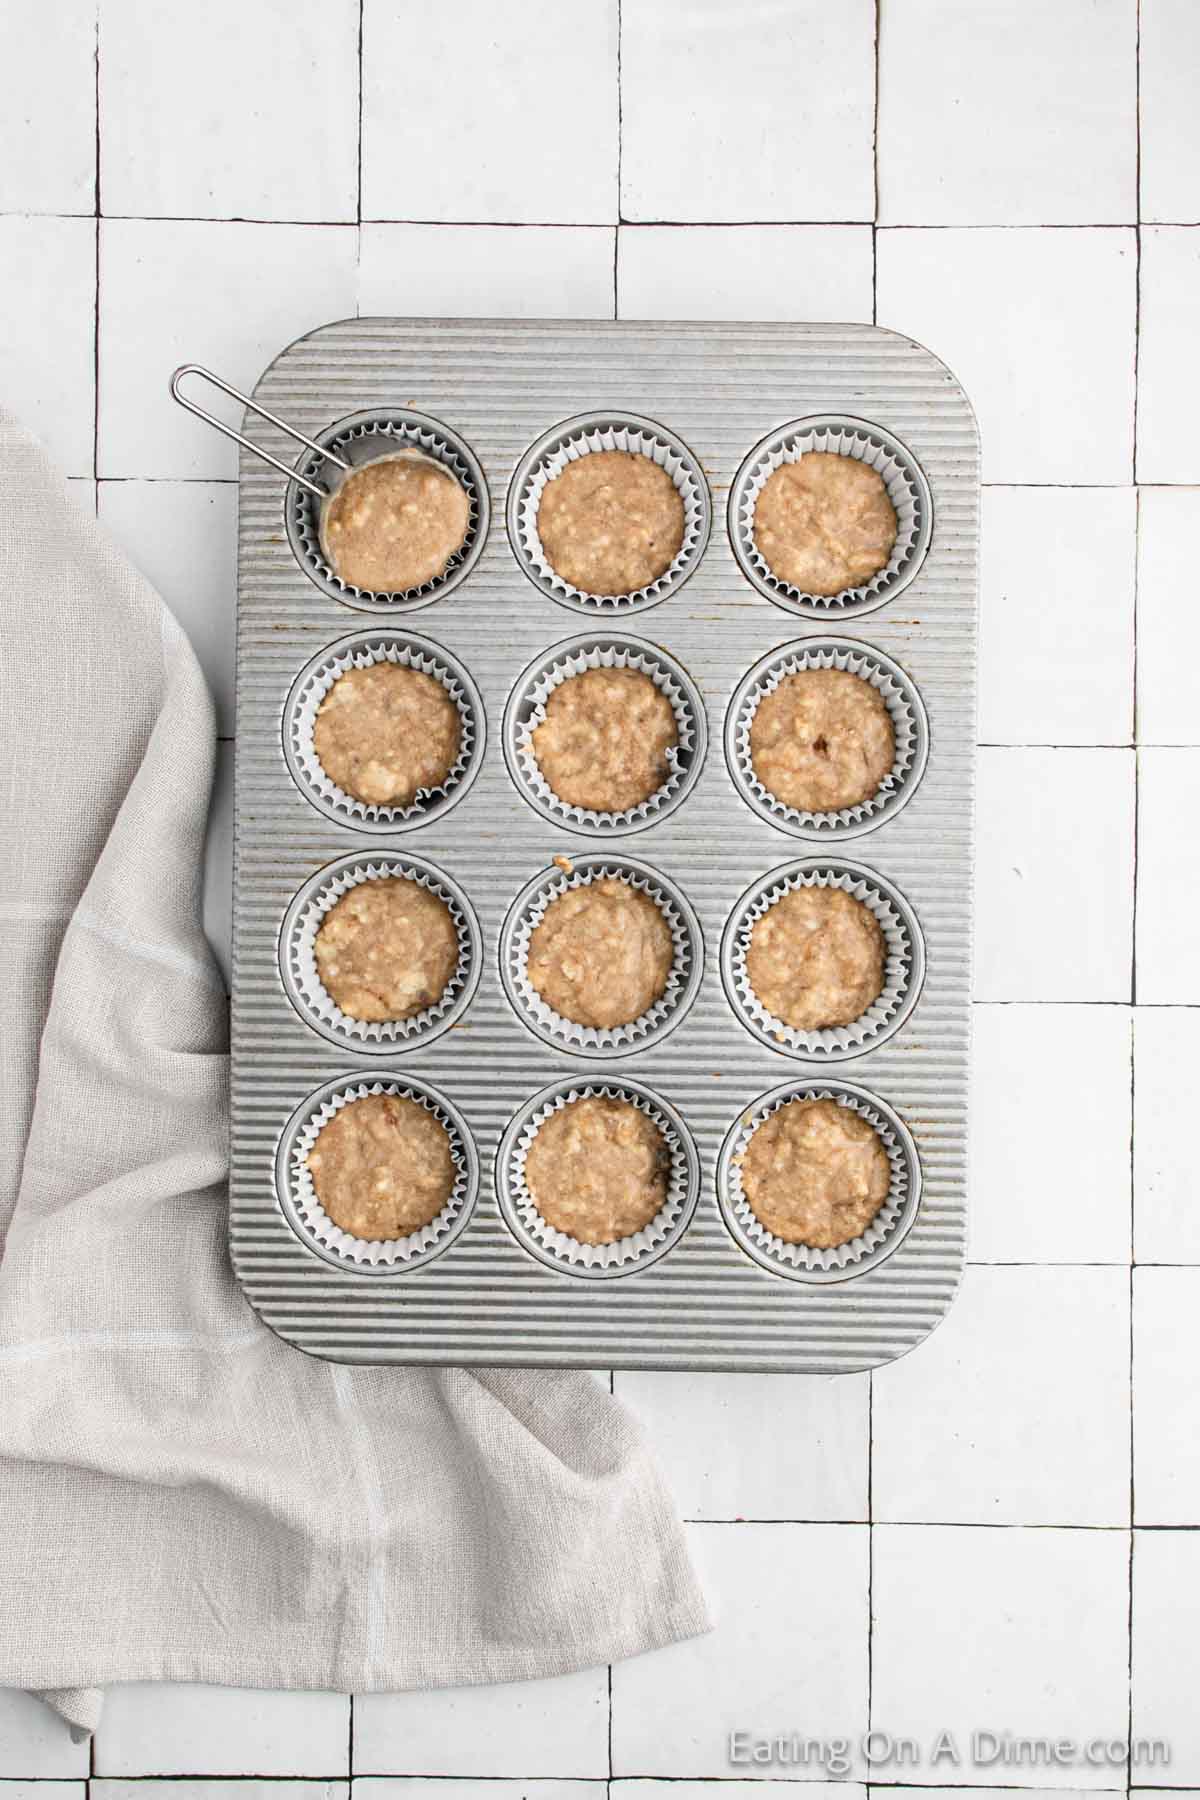 Muffin batter being divided in a muffin pan